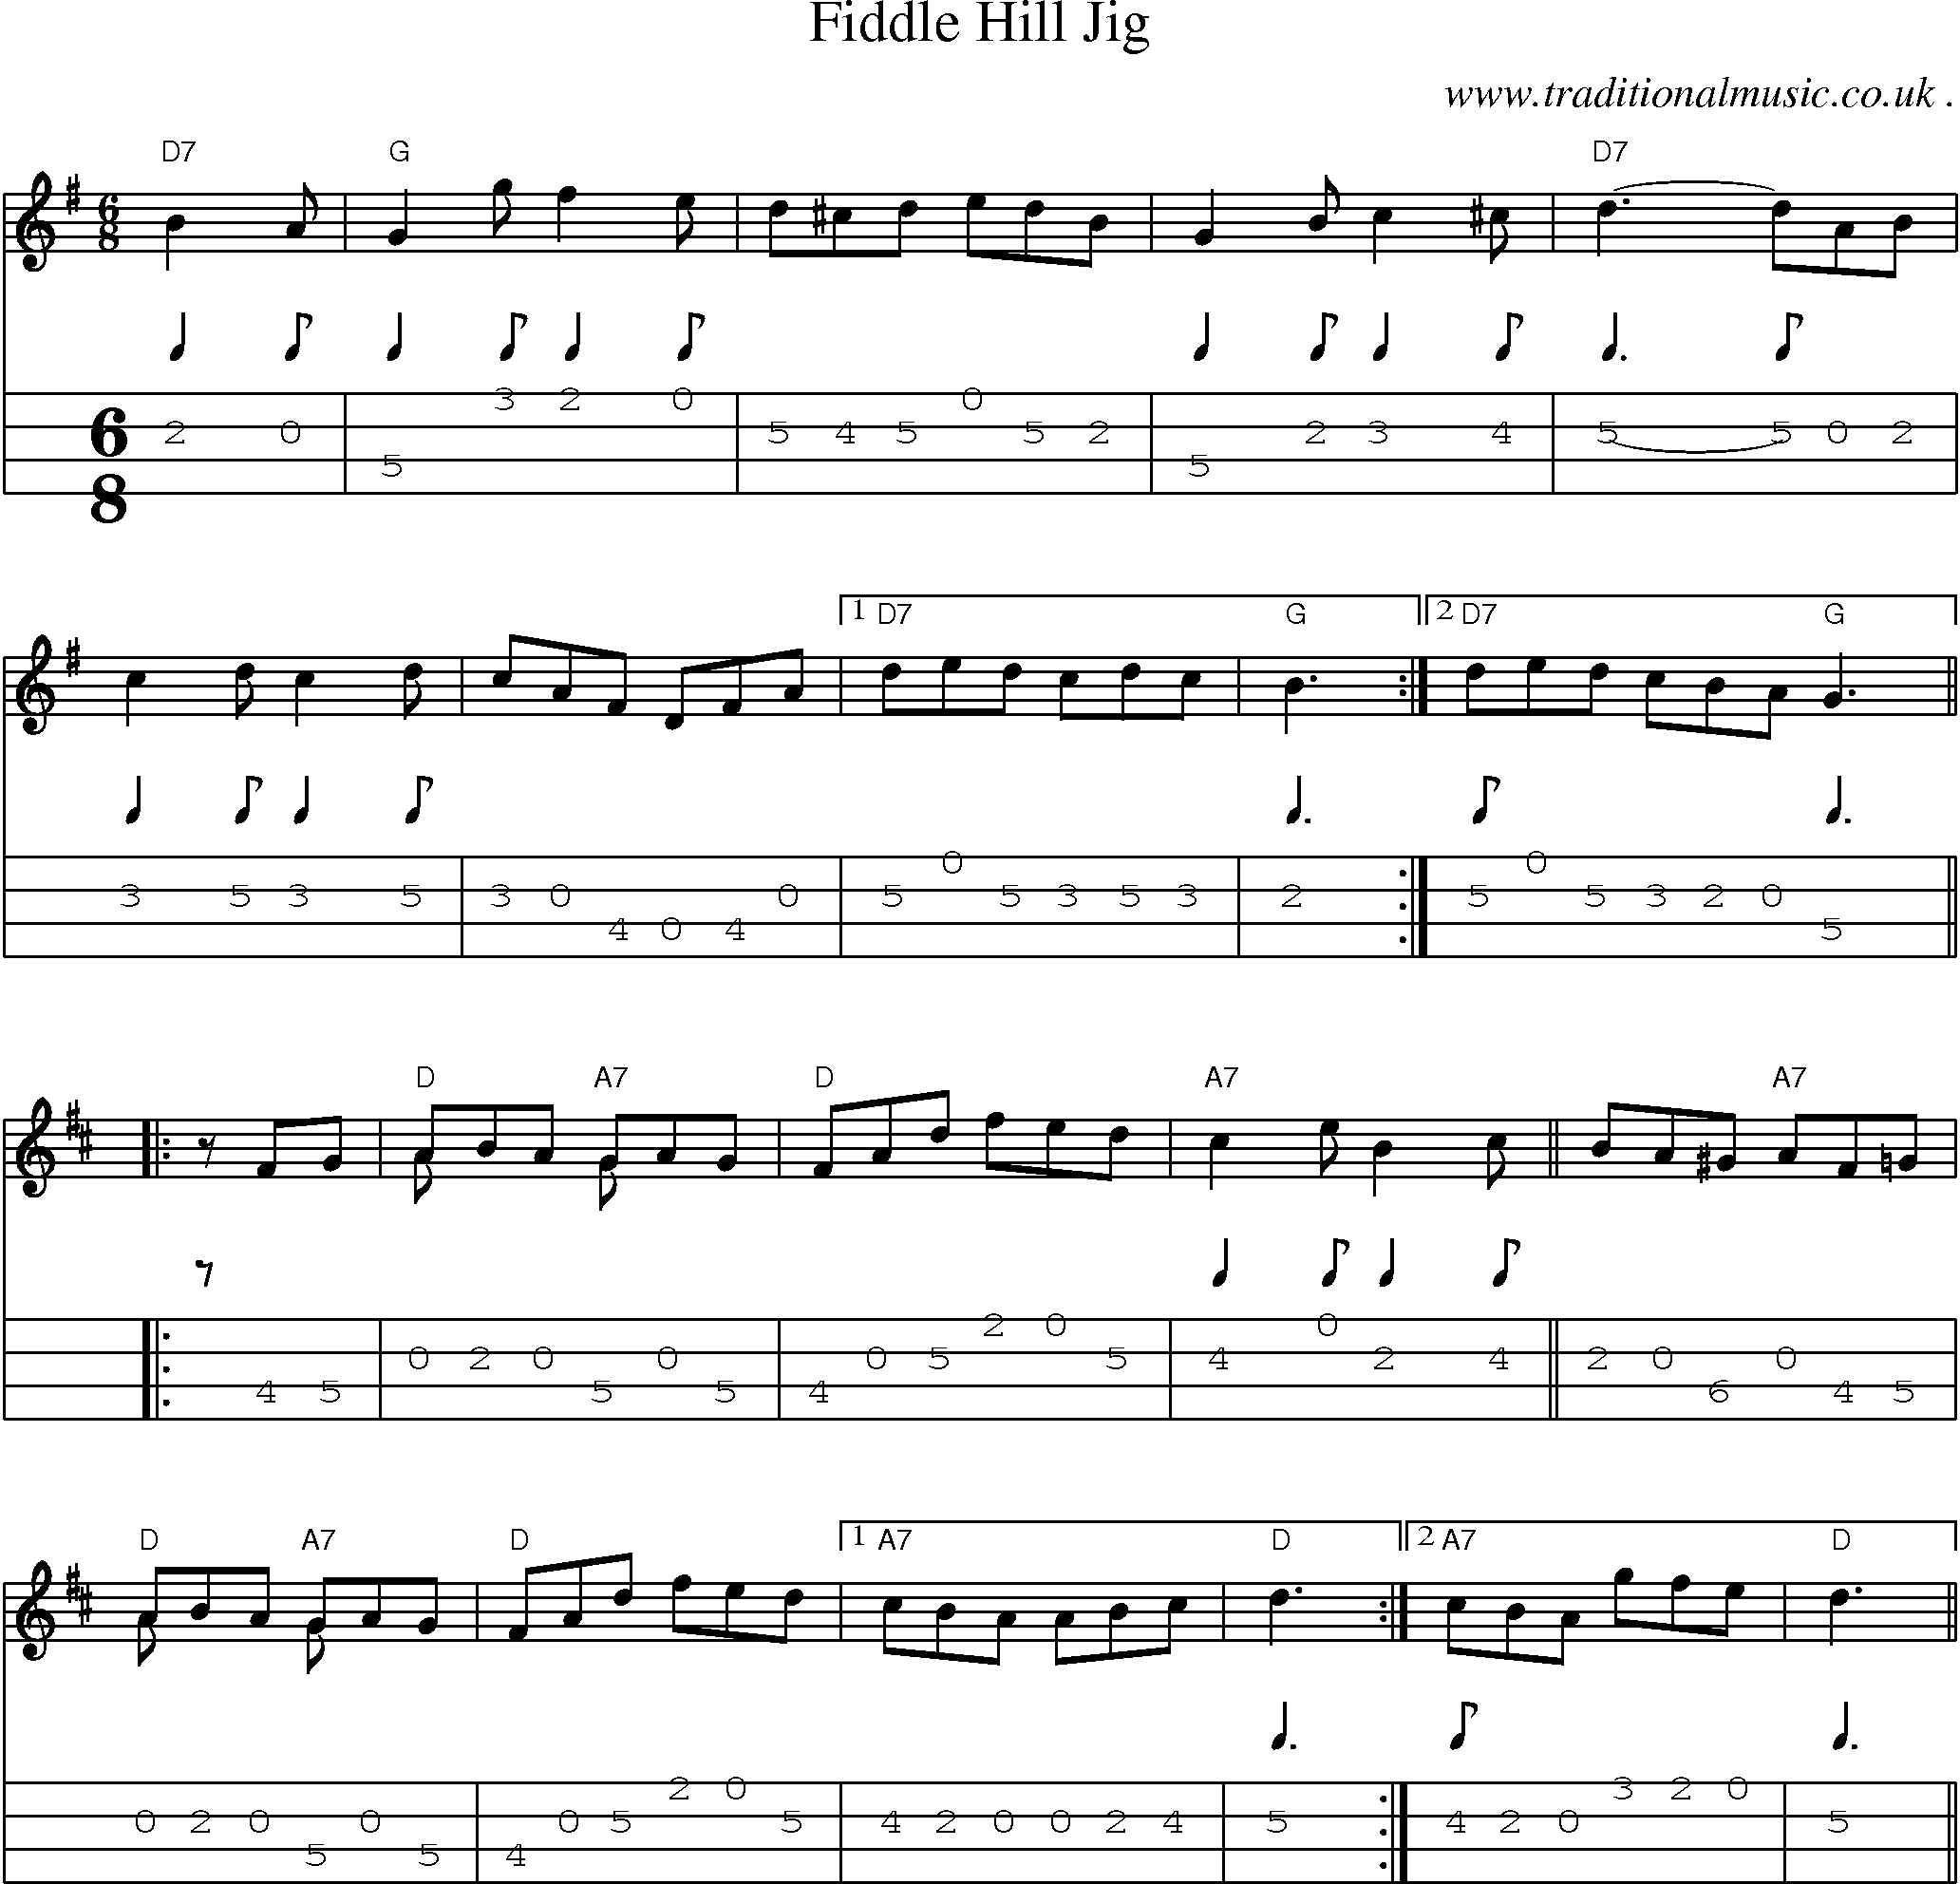 Music Score and Mandolin Tabs for Fiddle Hill Jig